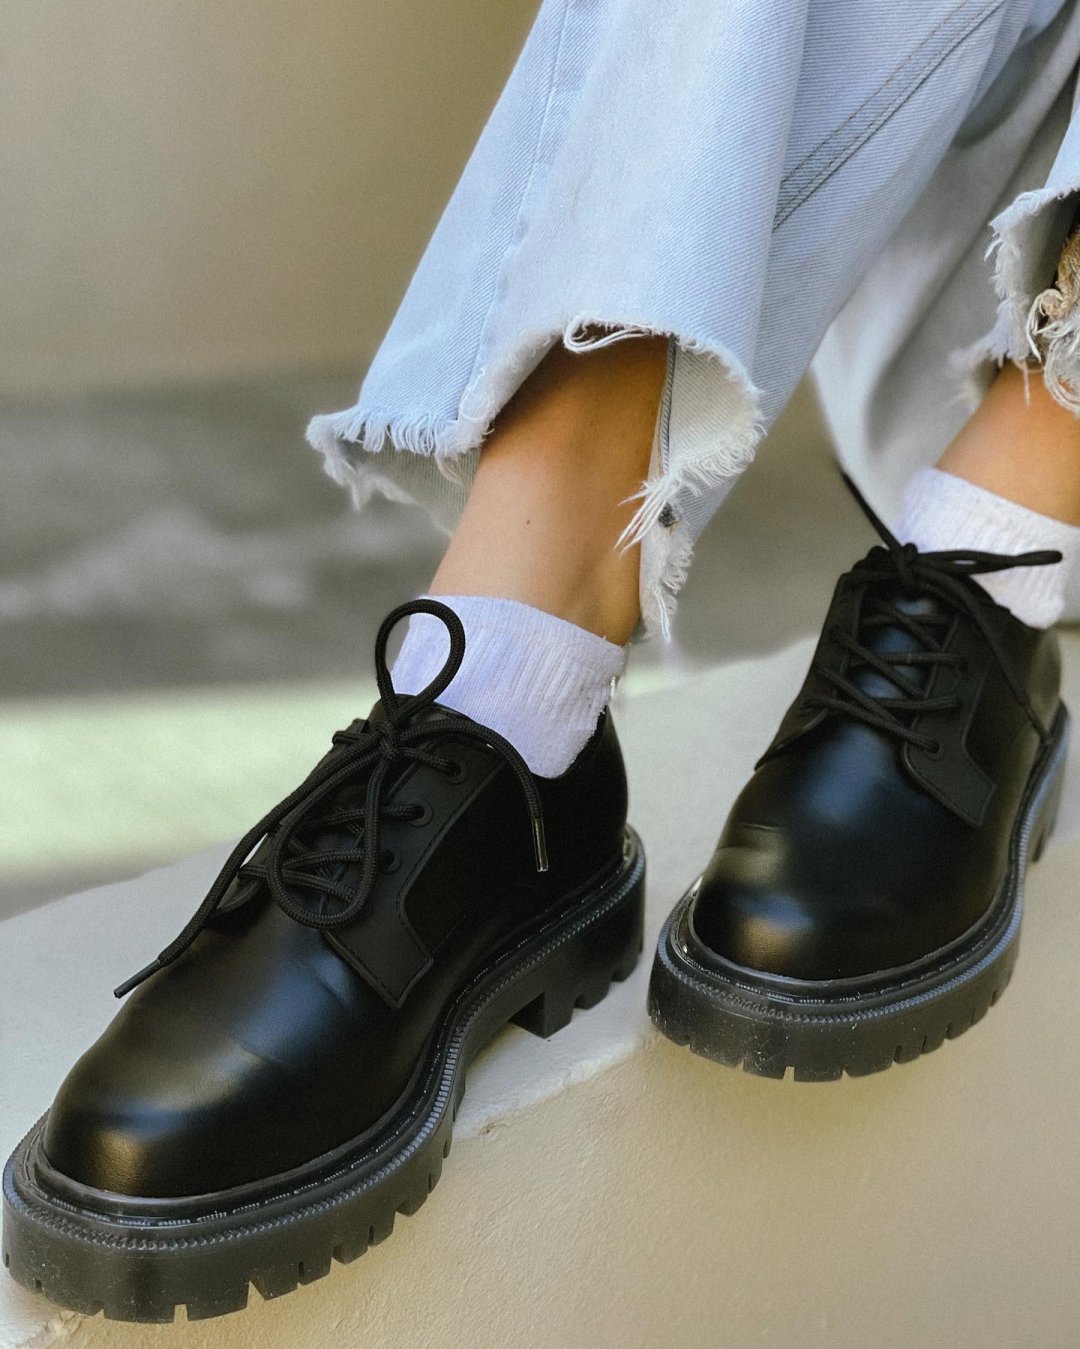 ALDO Shoes on "Lug at first Introducing Alexisse, our trendy chunky oxford shoes made with vegan leather (you got that right!). https://t.co/zHZNFHLBko Photo by Yana Anne #AldoAmbassador #AldoShoes https://t.co/ZMKYLUuOM0" /